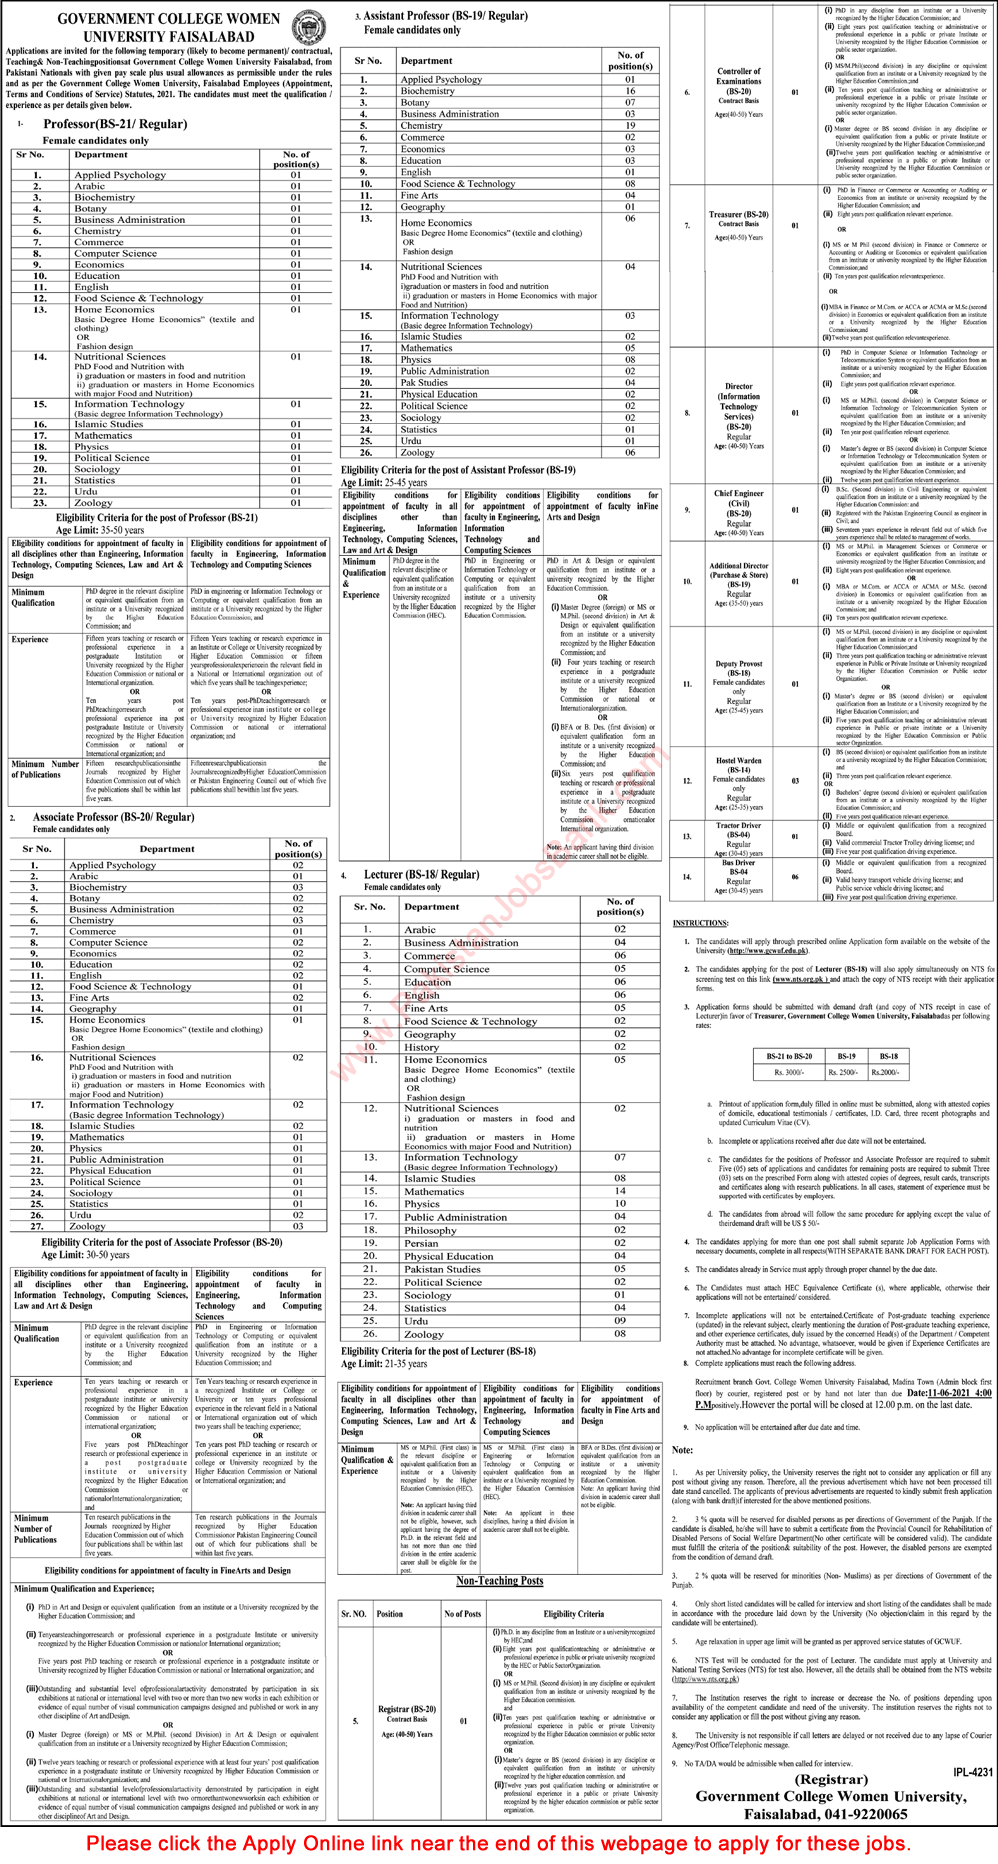 Government College Women University Faisalabad Jobs 2021 May GCWUF Apply Online Latest